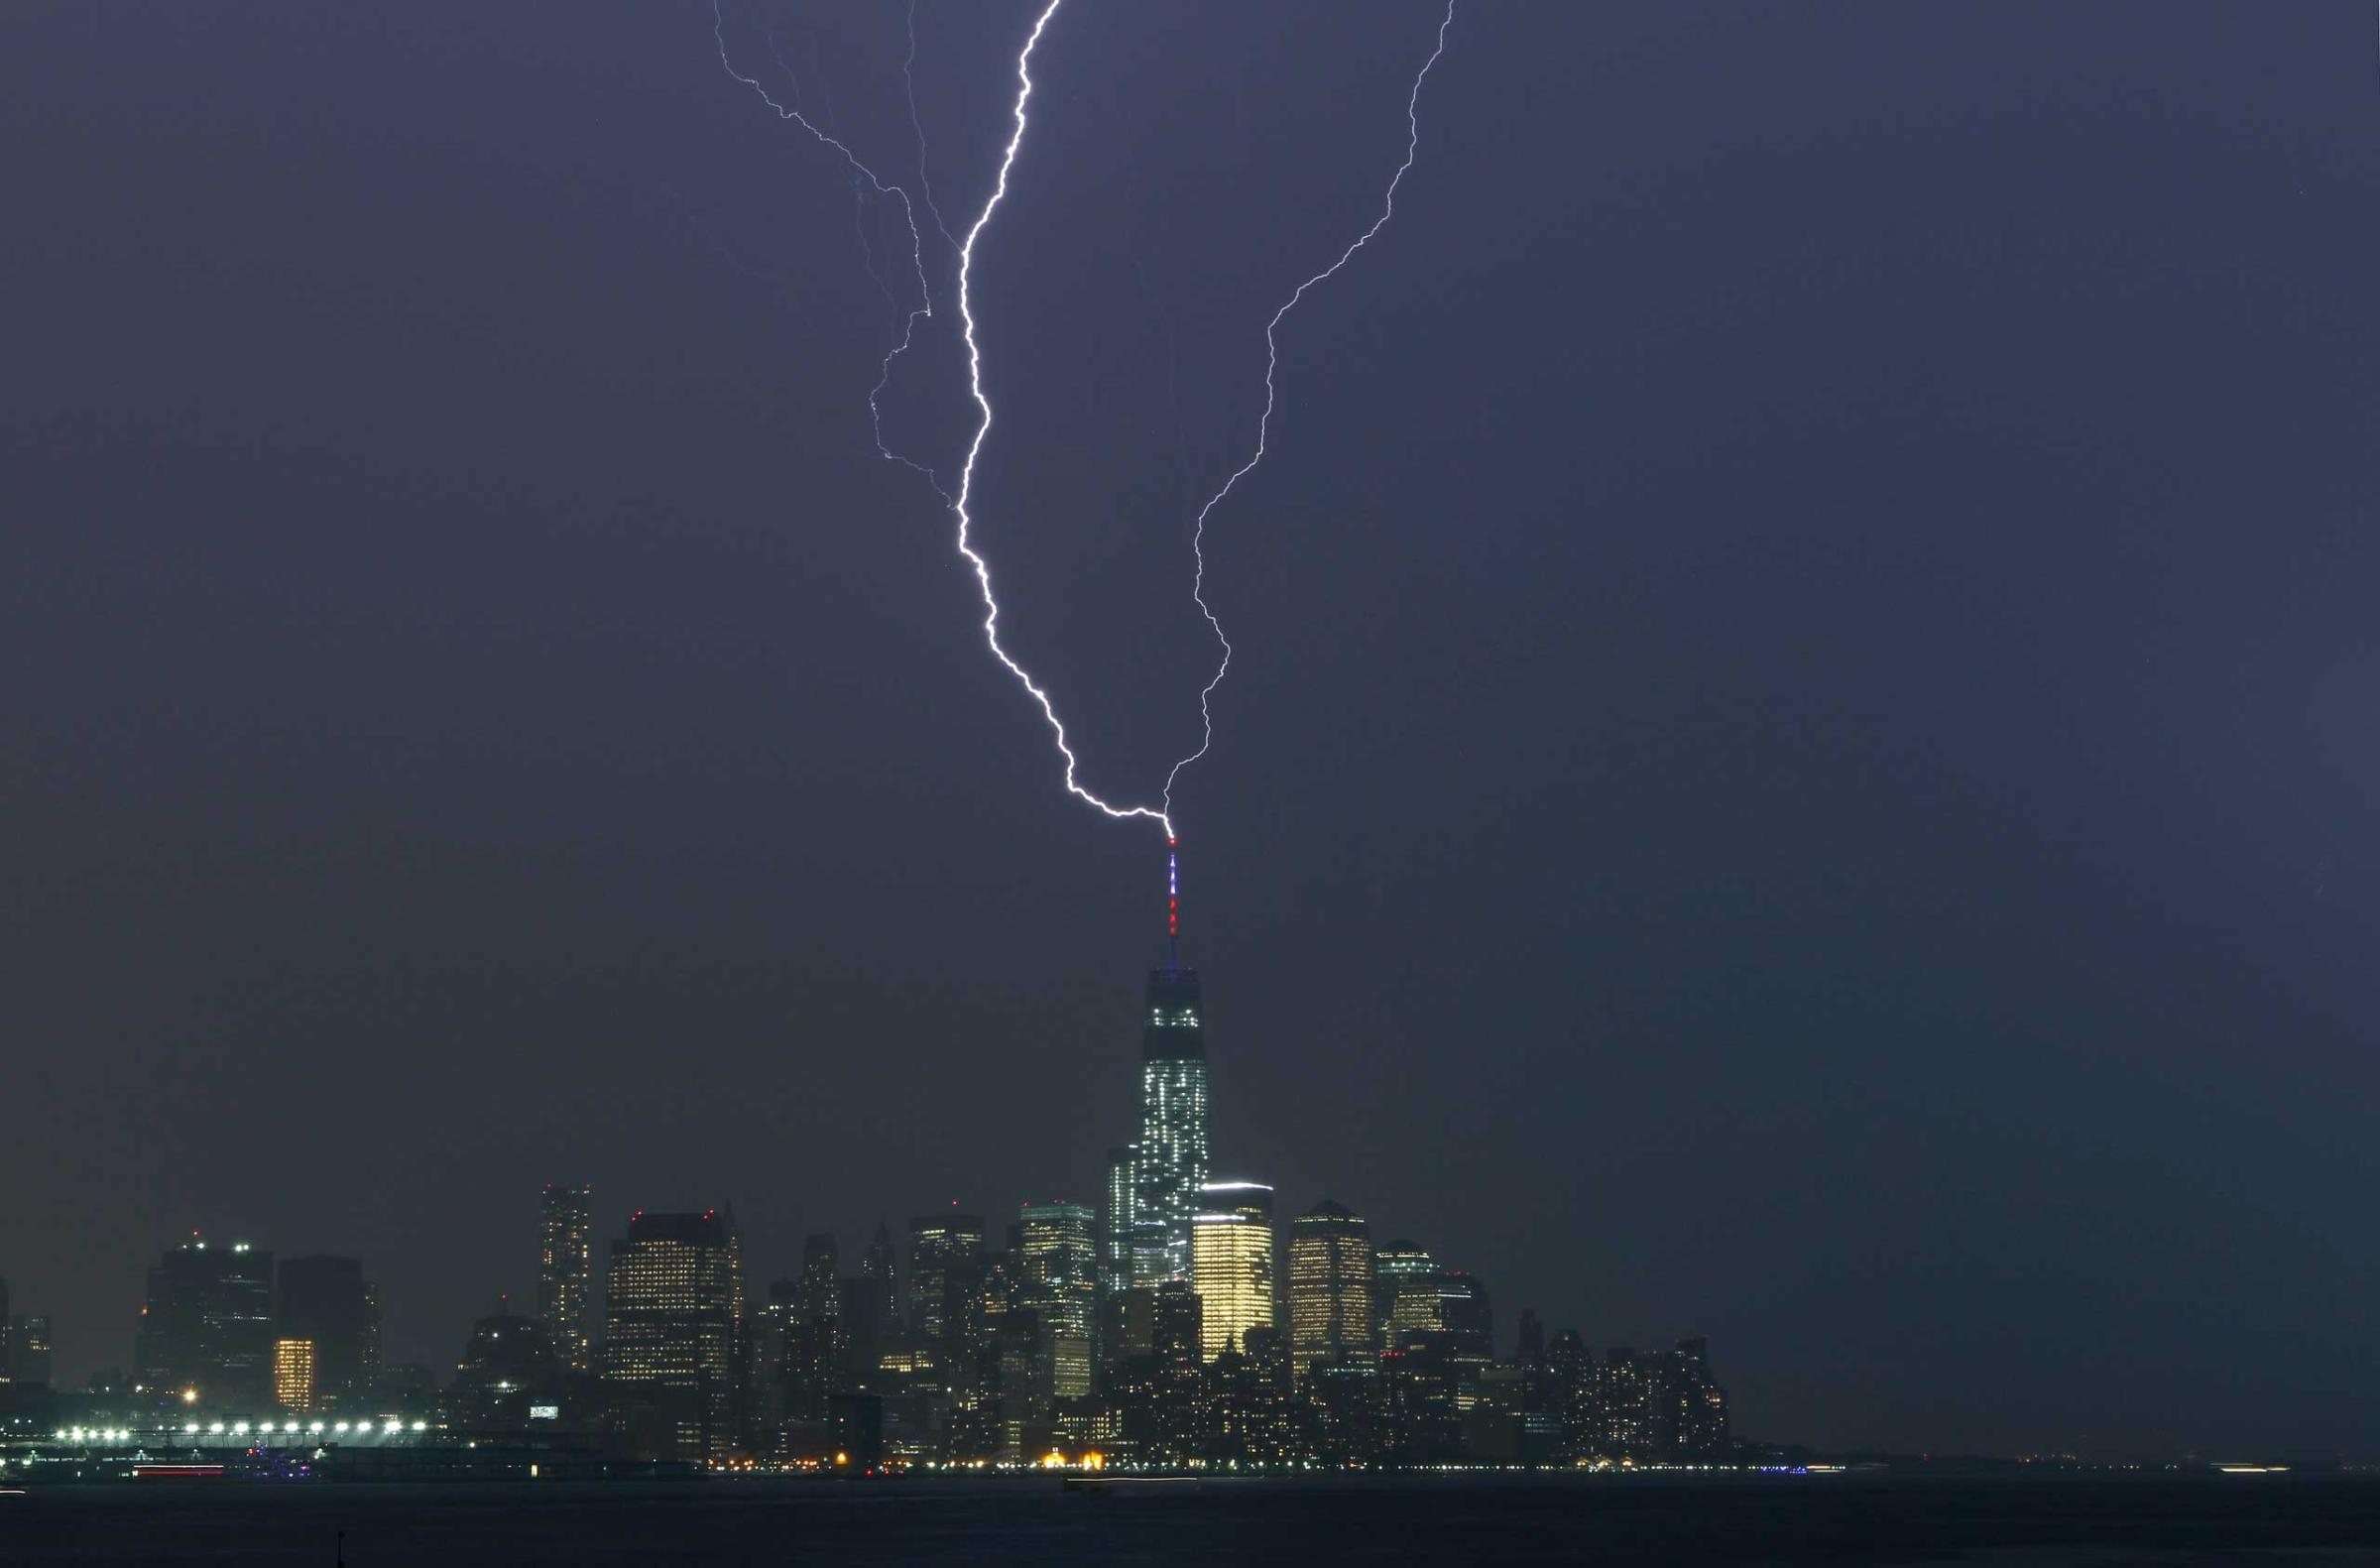 Two bolts of lightning hit the antenna on One World Trade Center